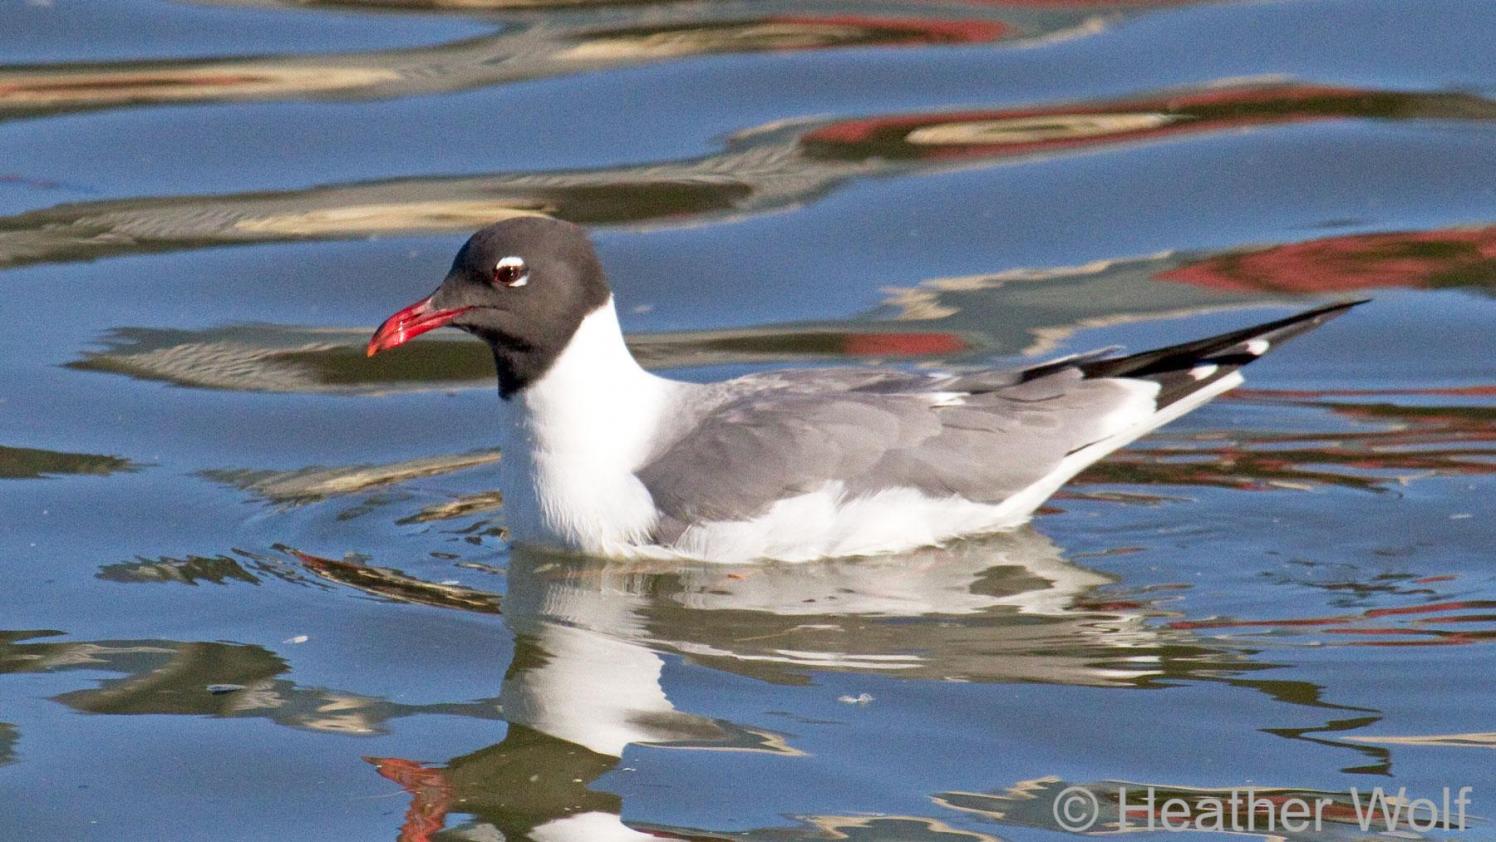 Laughing Gull in the water